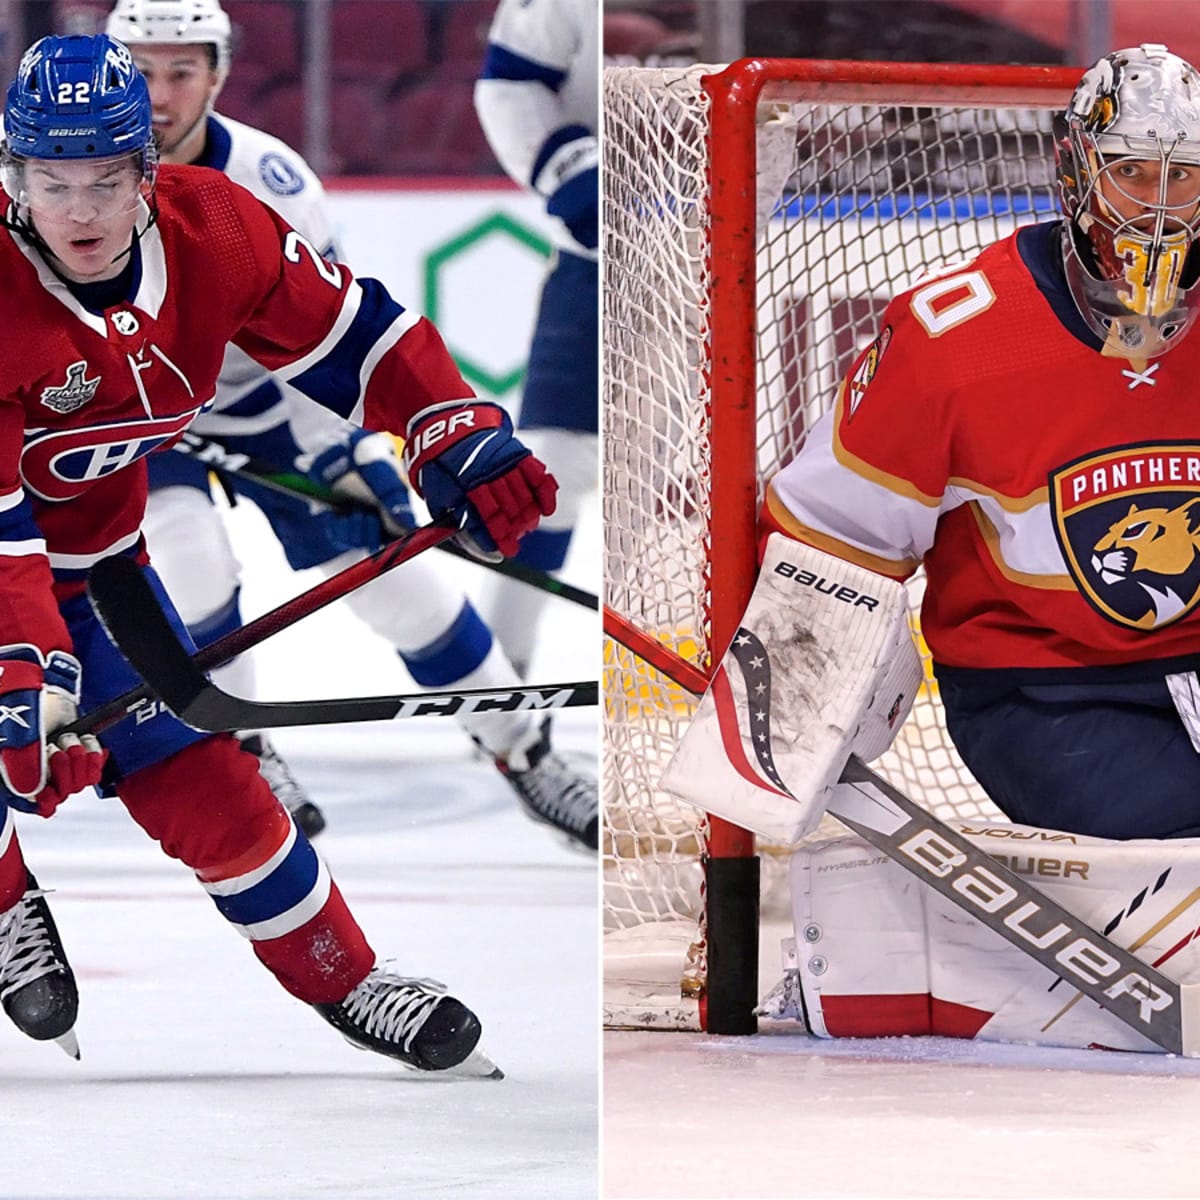 2021 NHL Draft Class Superlatives: Who is the best skater, most